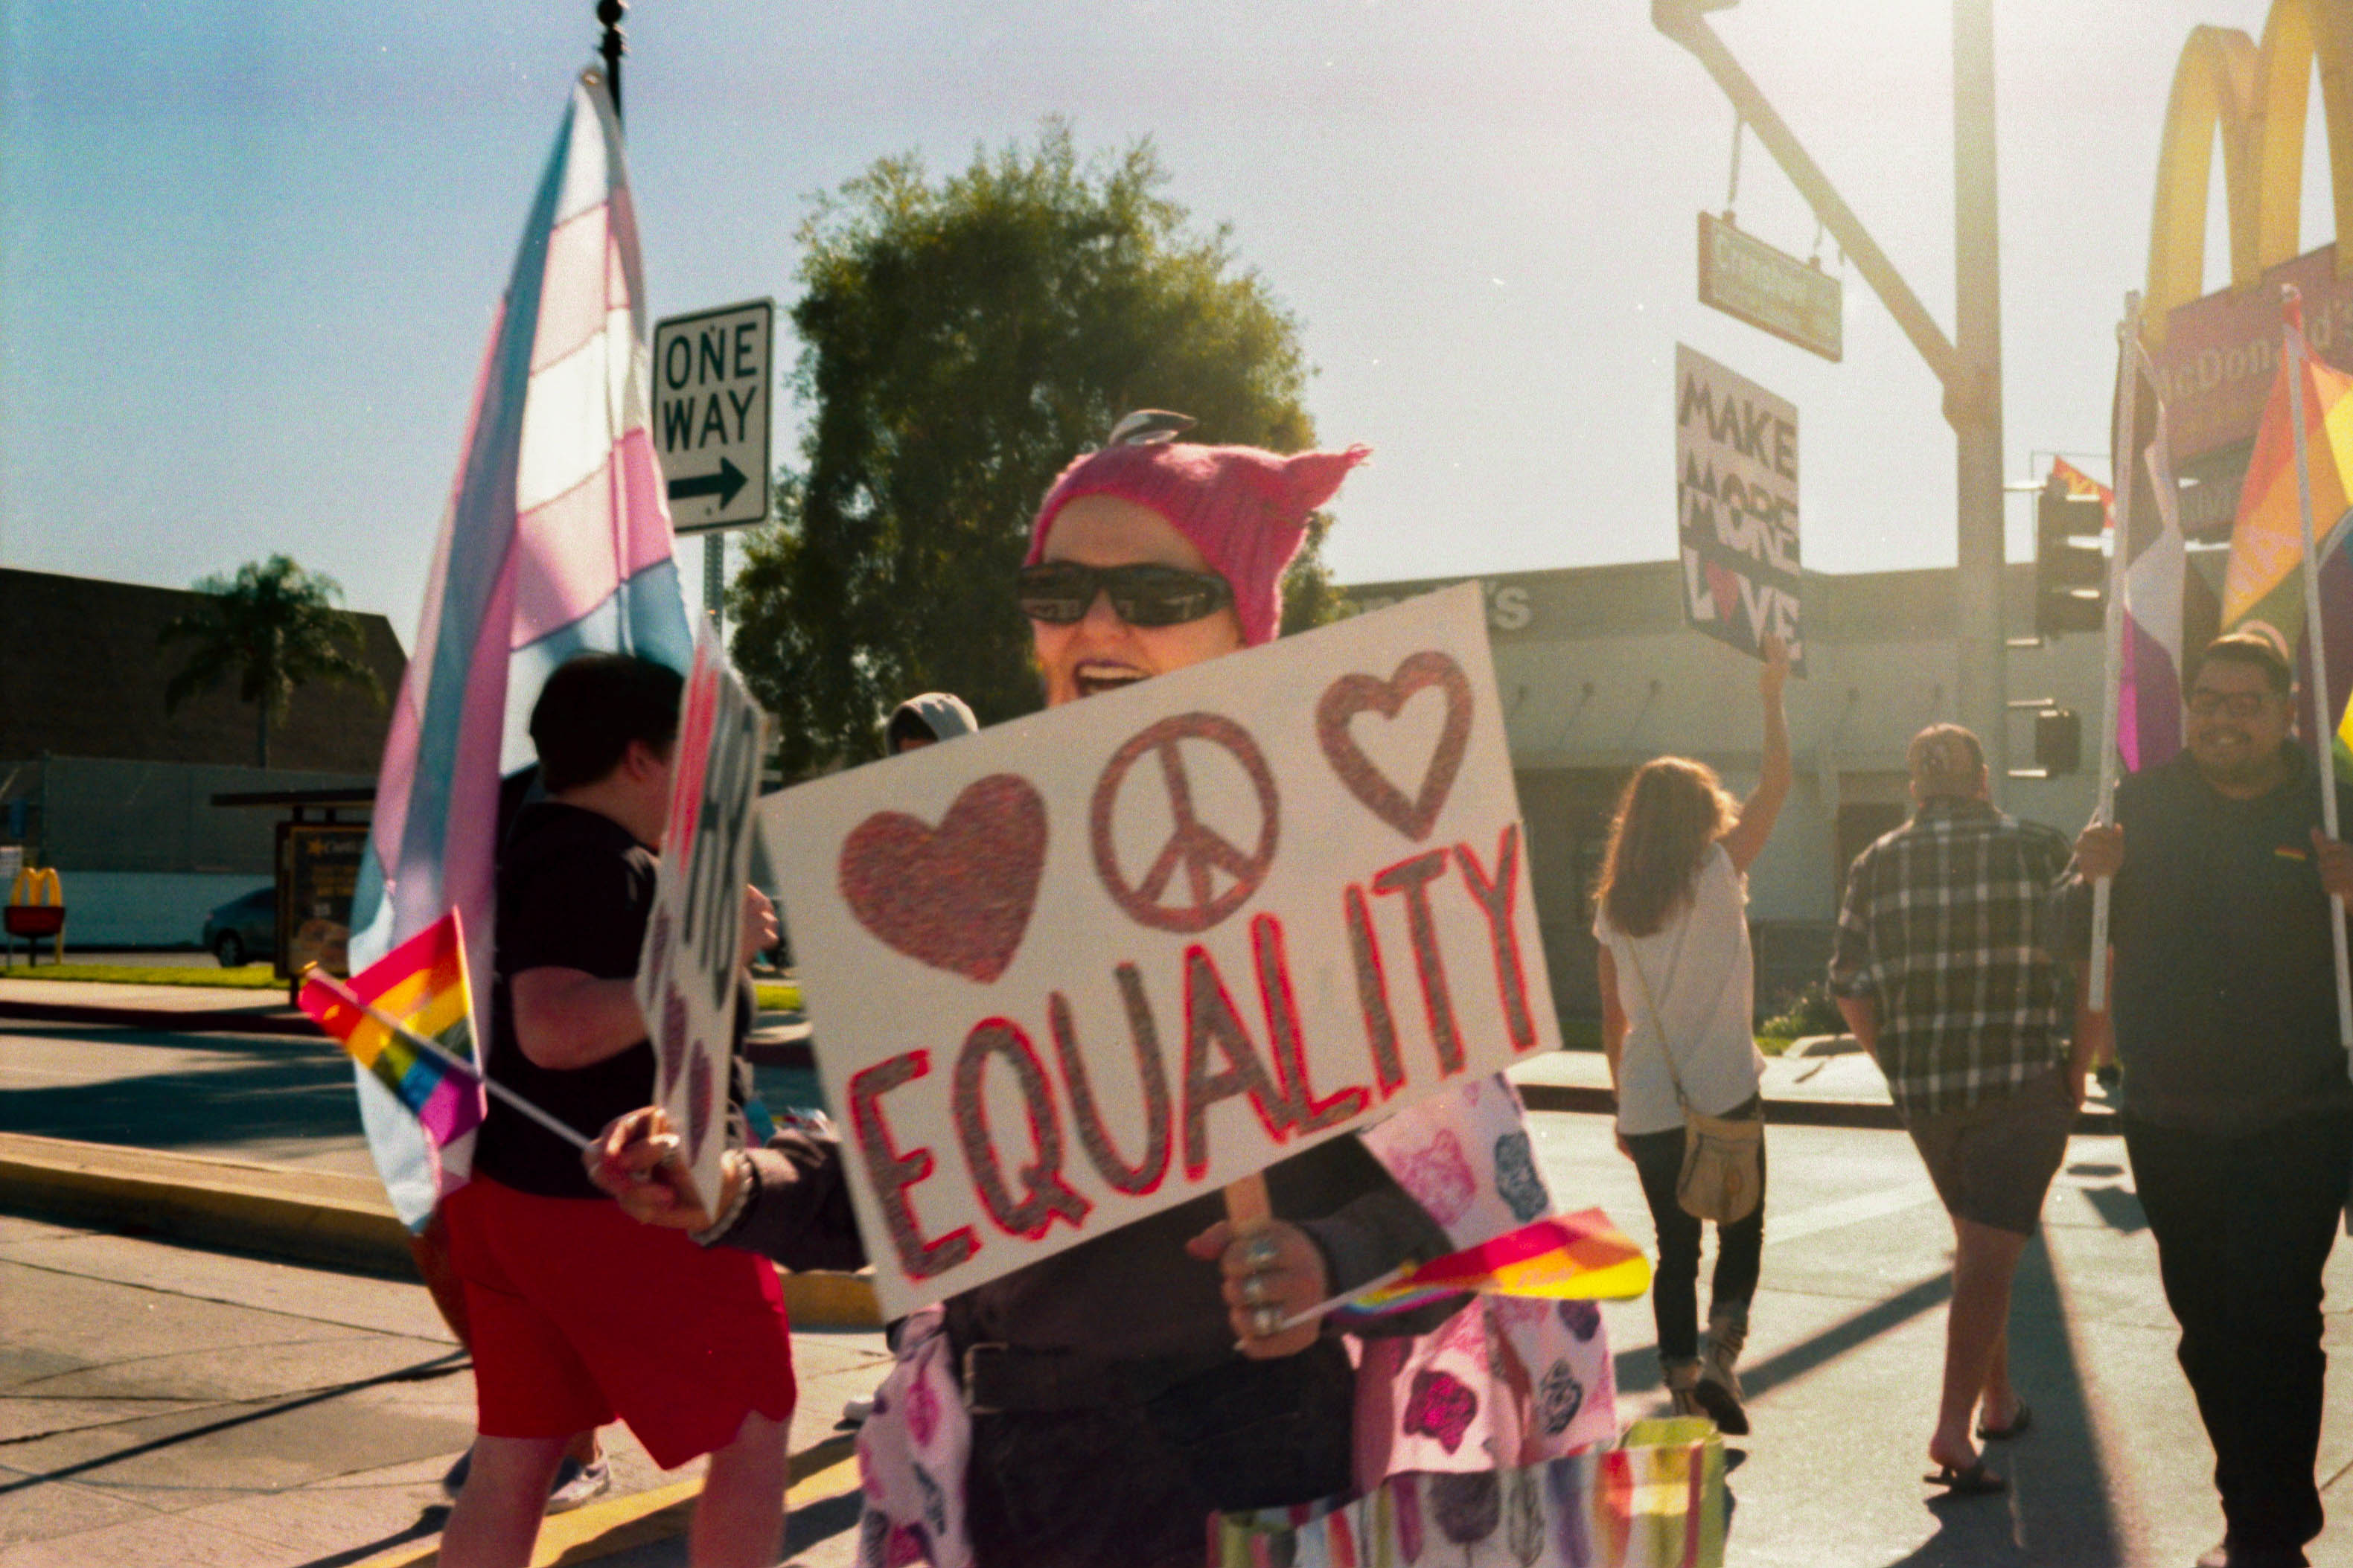 Woman holding an equality sign